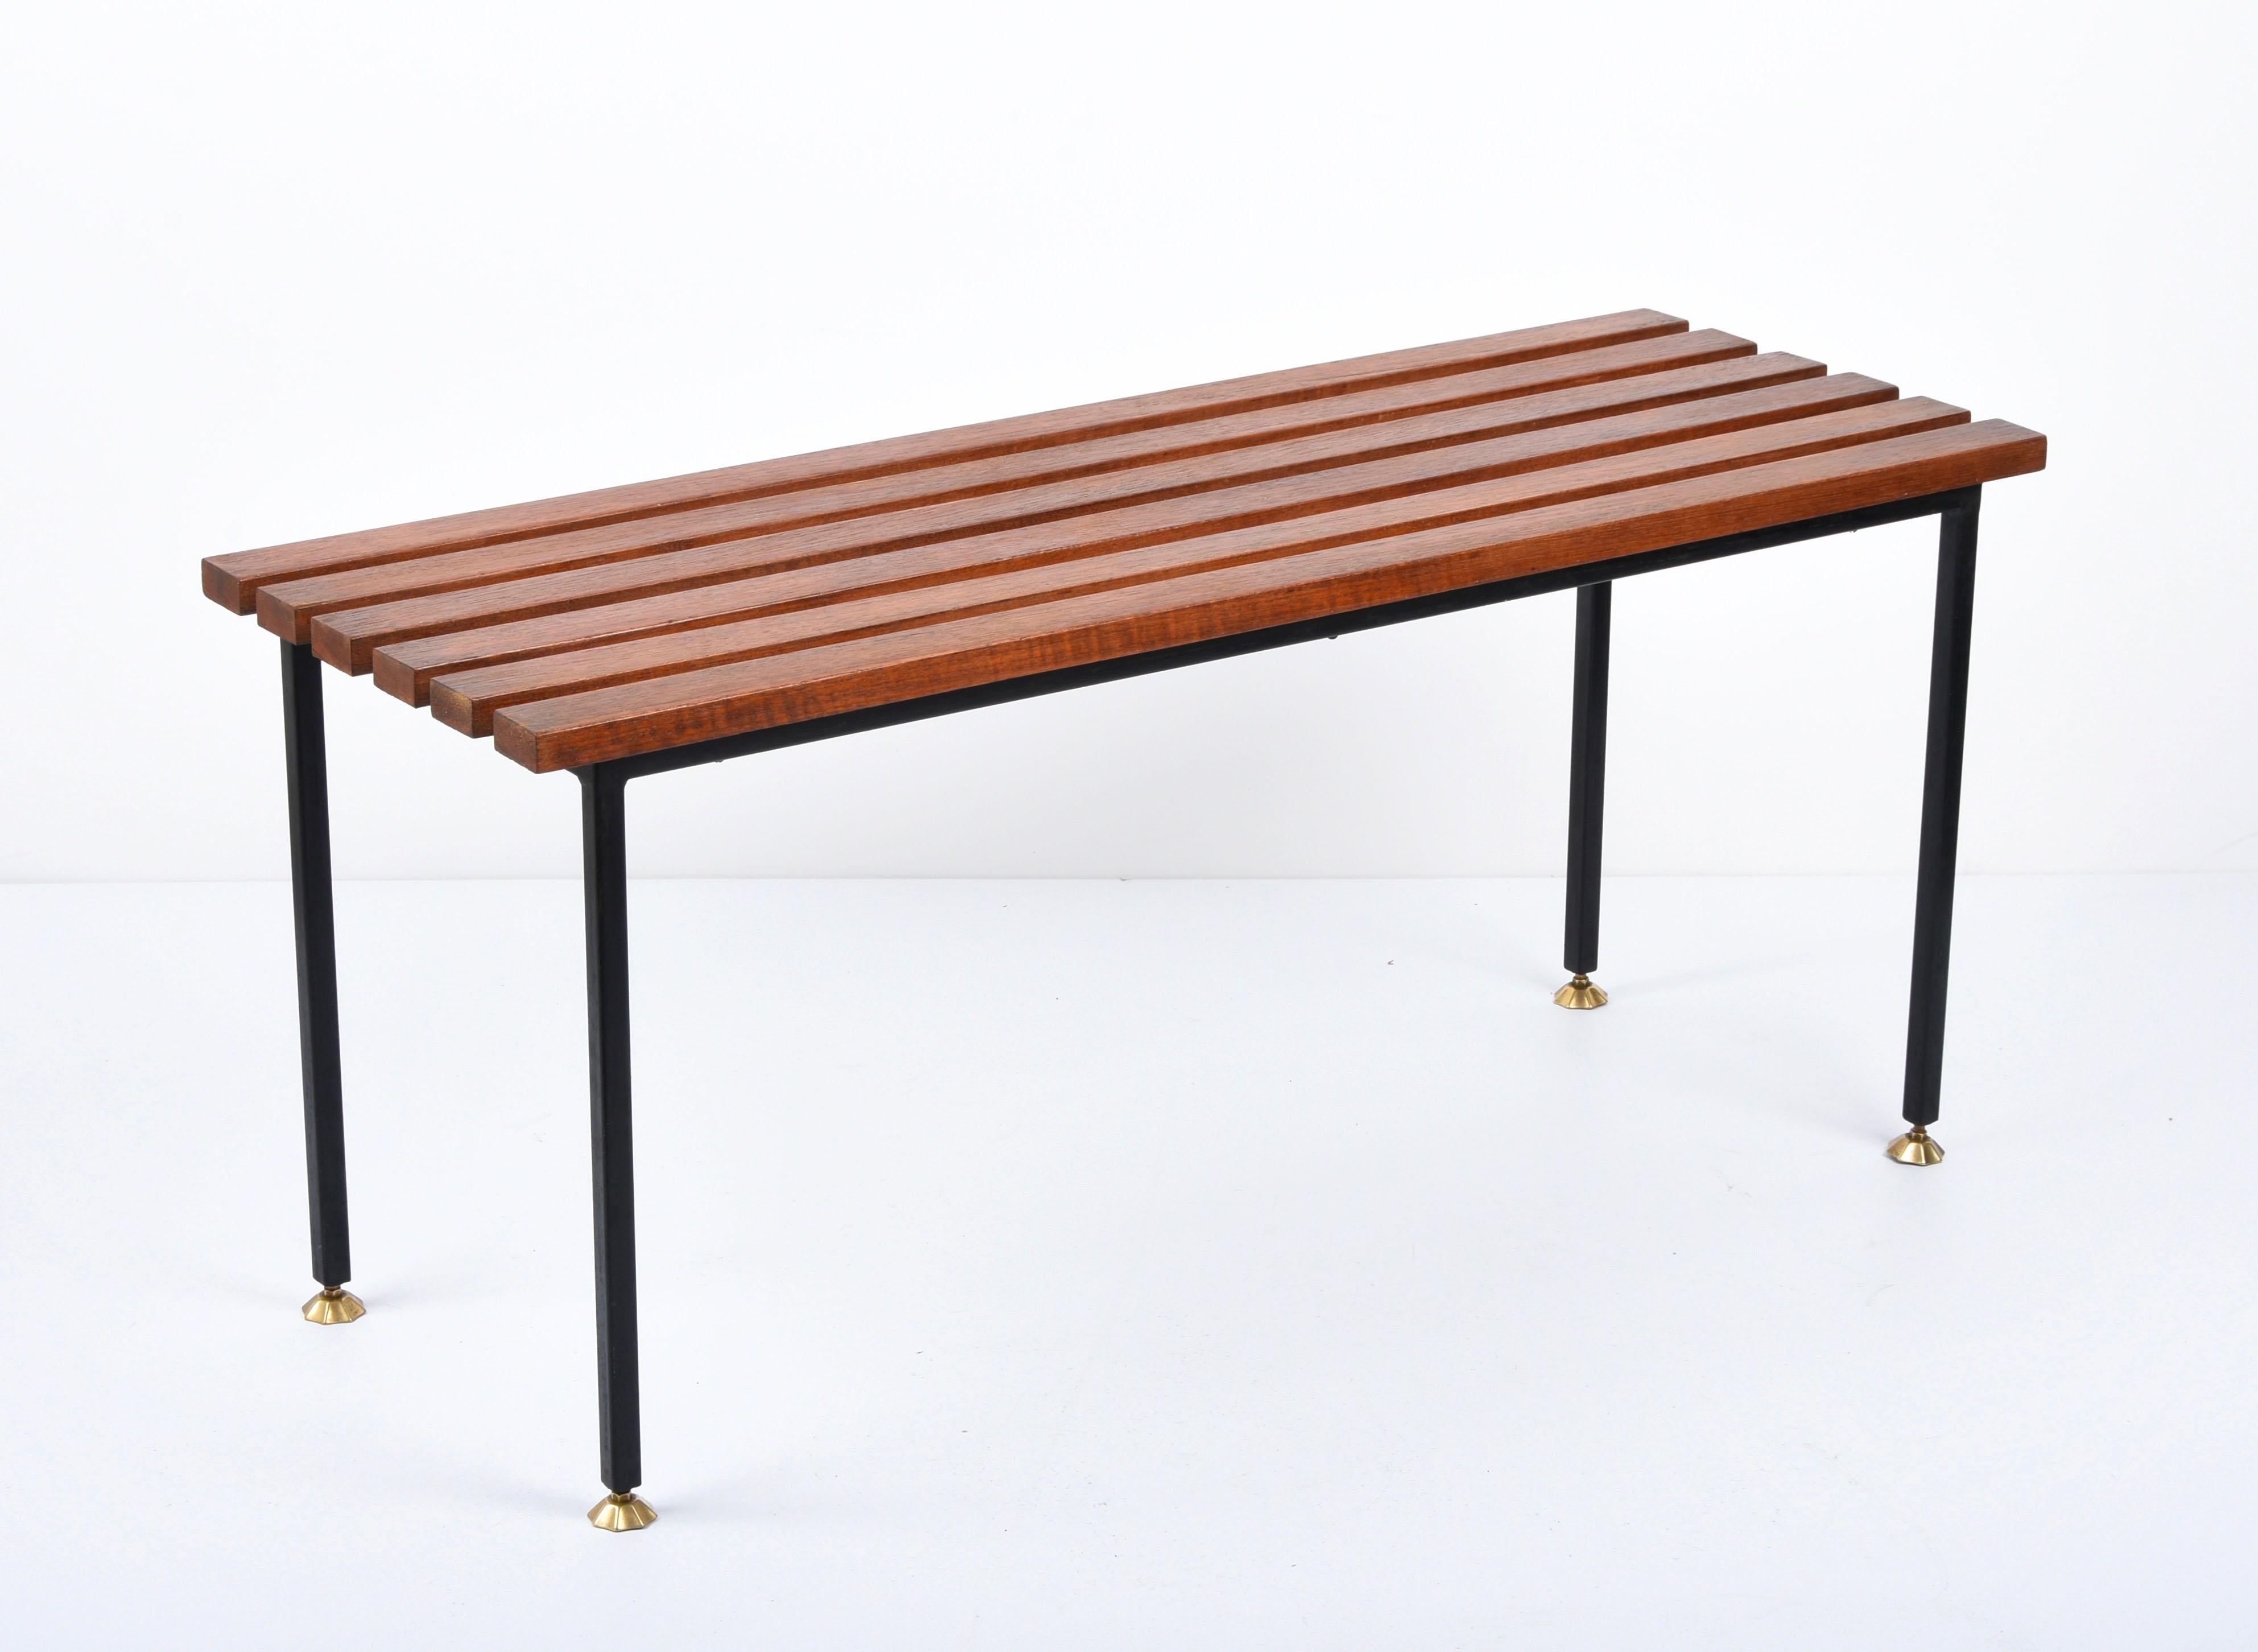 Midcentury Teak and Black Enameled Metal Italian Bench with Brass Feet, 1960s For Sale 2